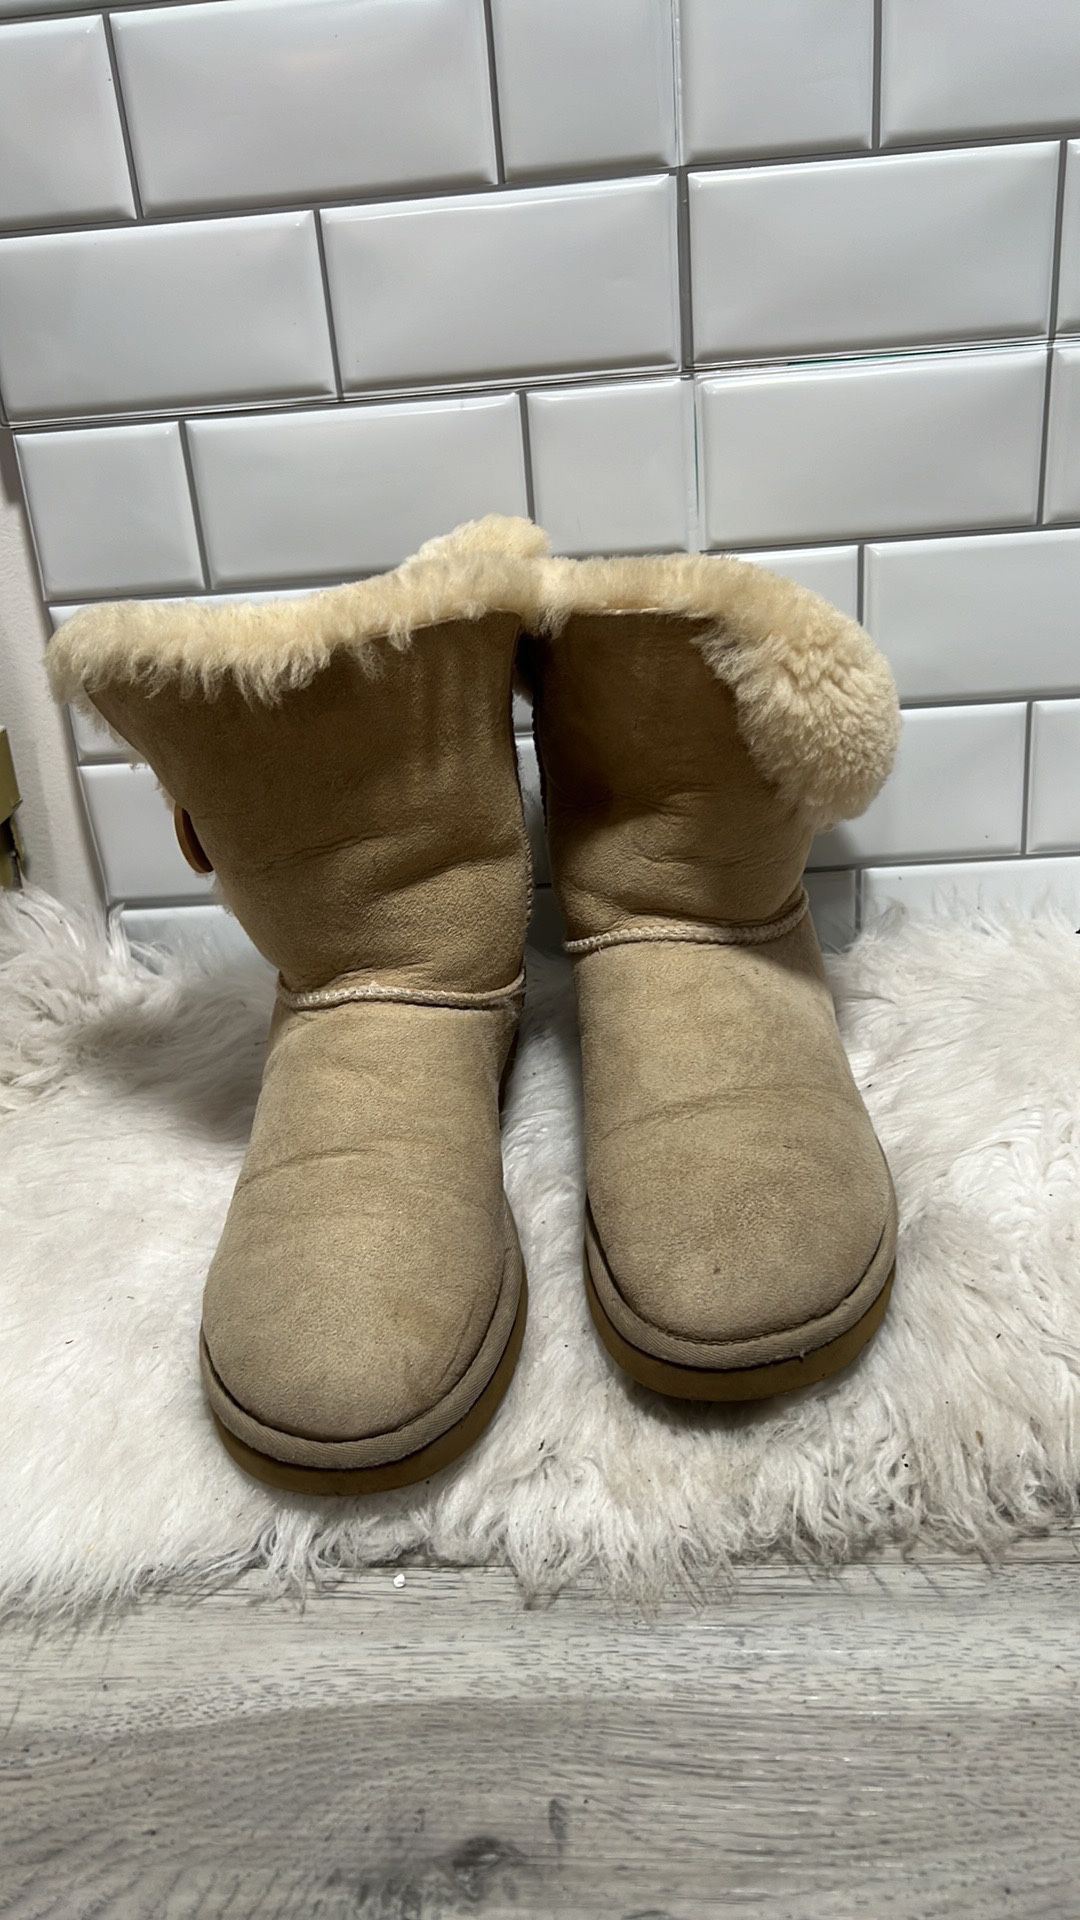 Ugg sand Bailey button boots size 9